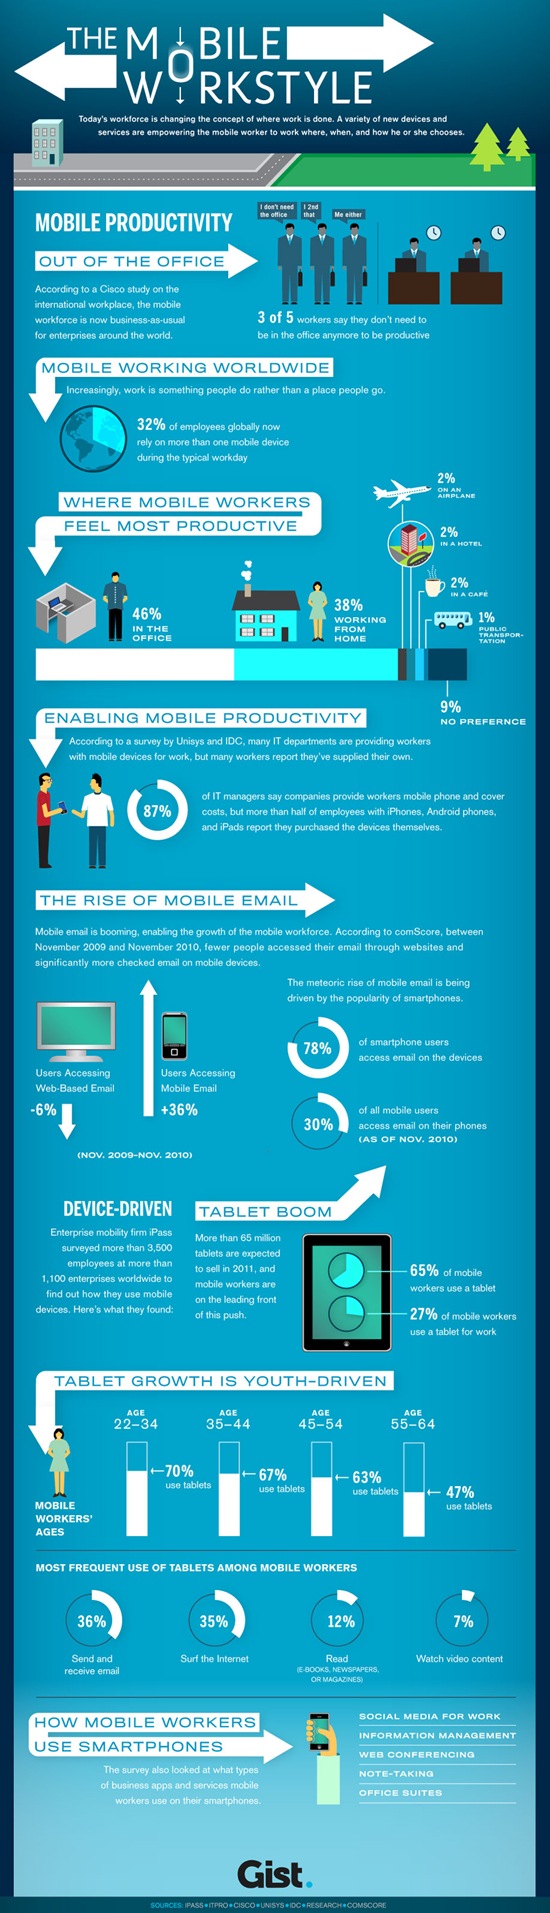 Gist-MobileWorkstyle_Infographic-C5